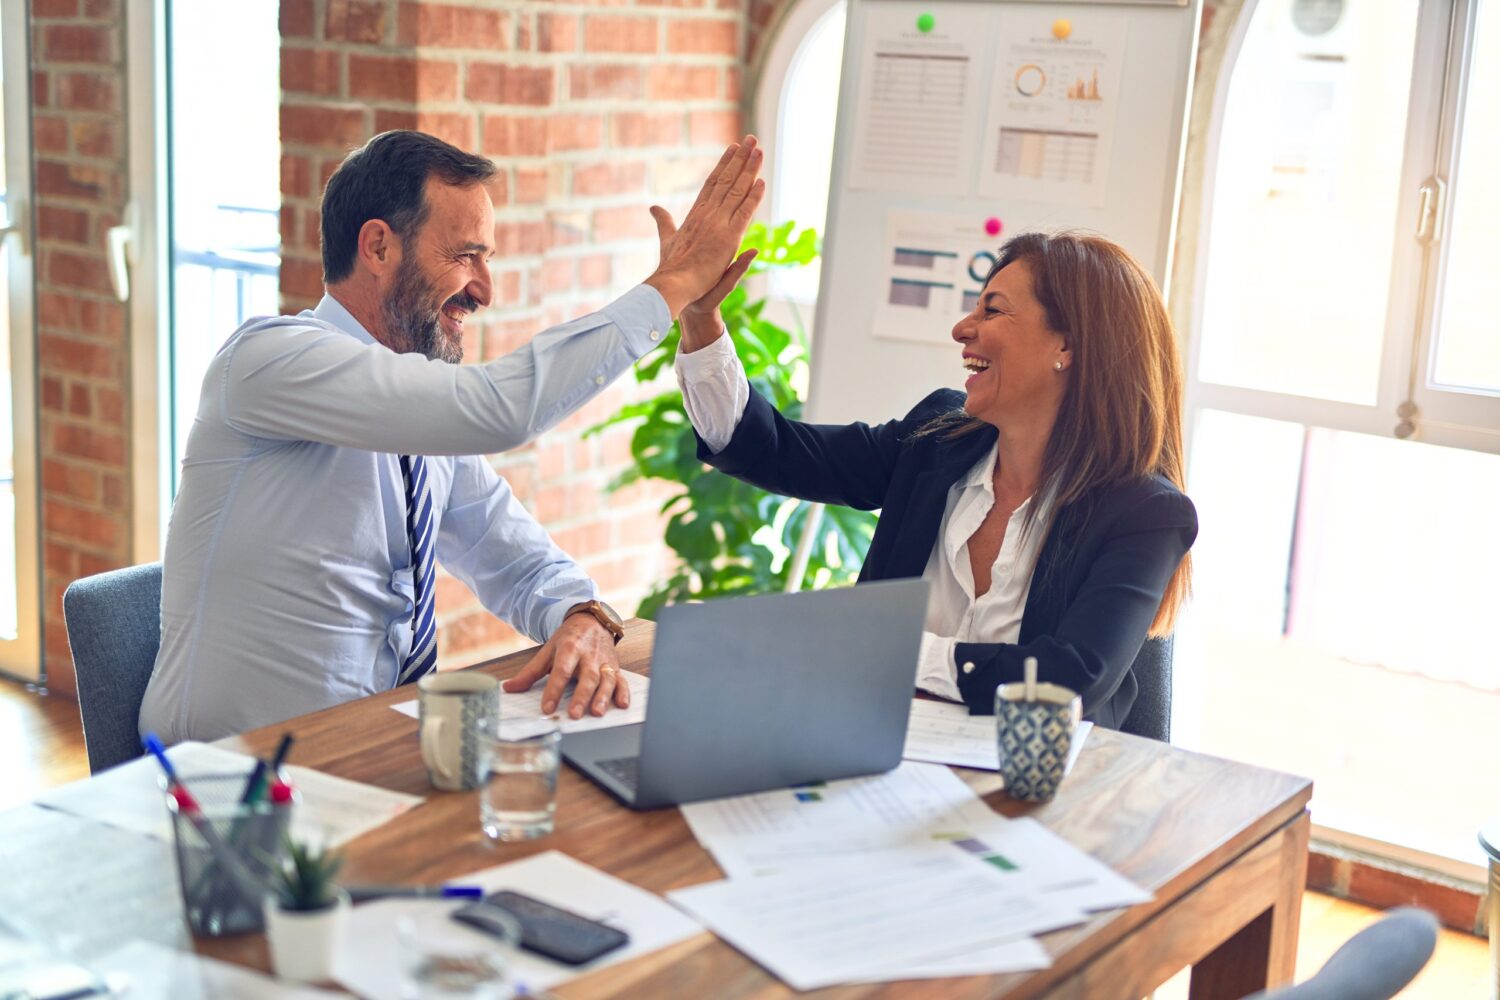 A business man and woman sitting at a desk high fiving each other